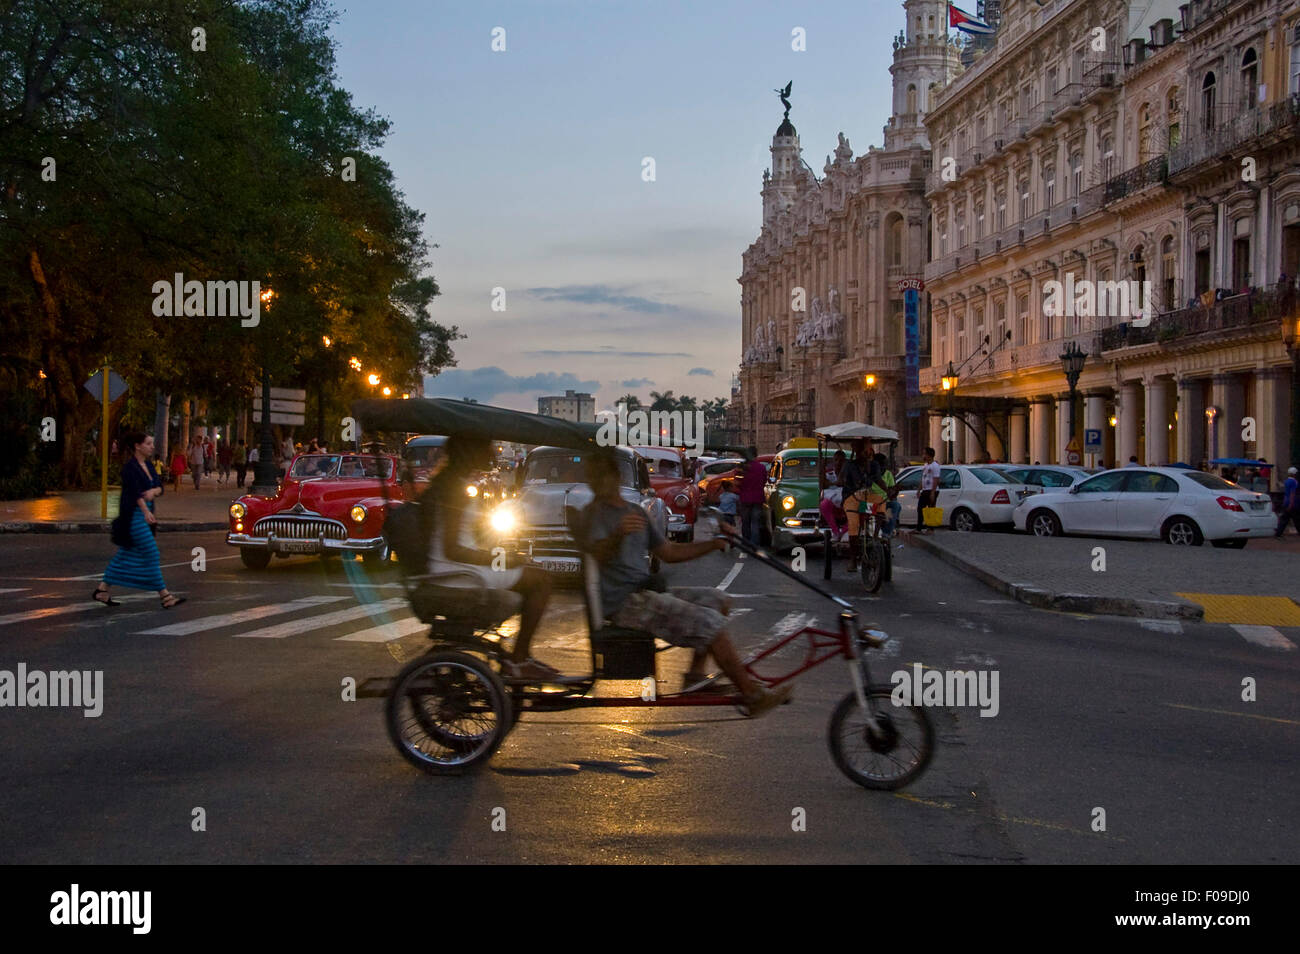 Horizontal street view of a bicyclette at dusk in Havana, Cuba. Stock Photo